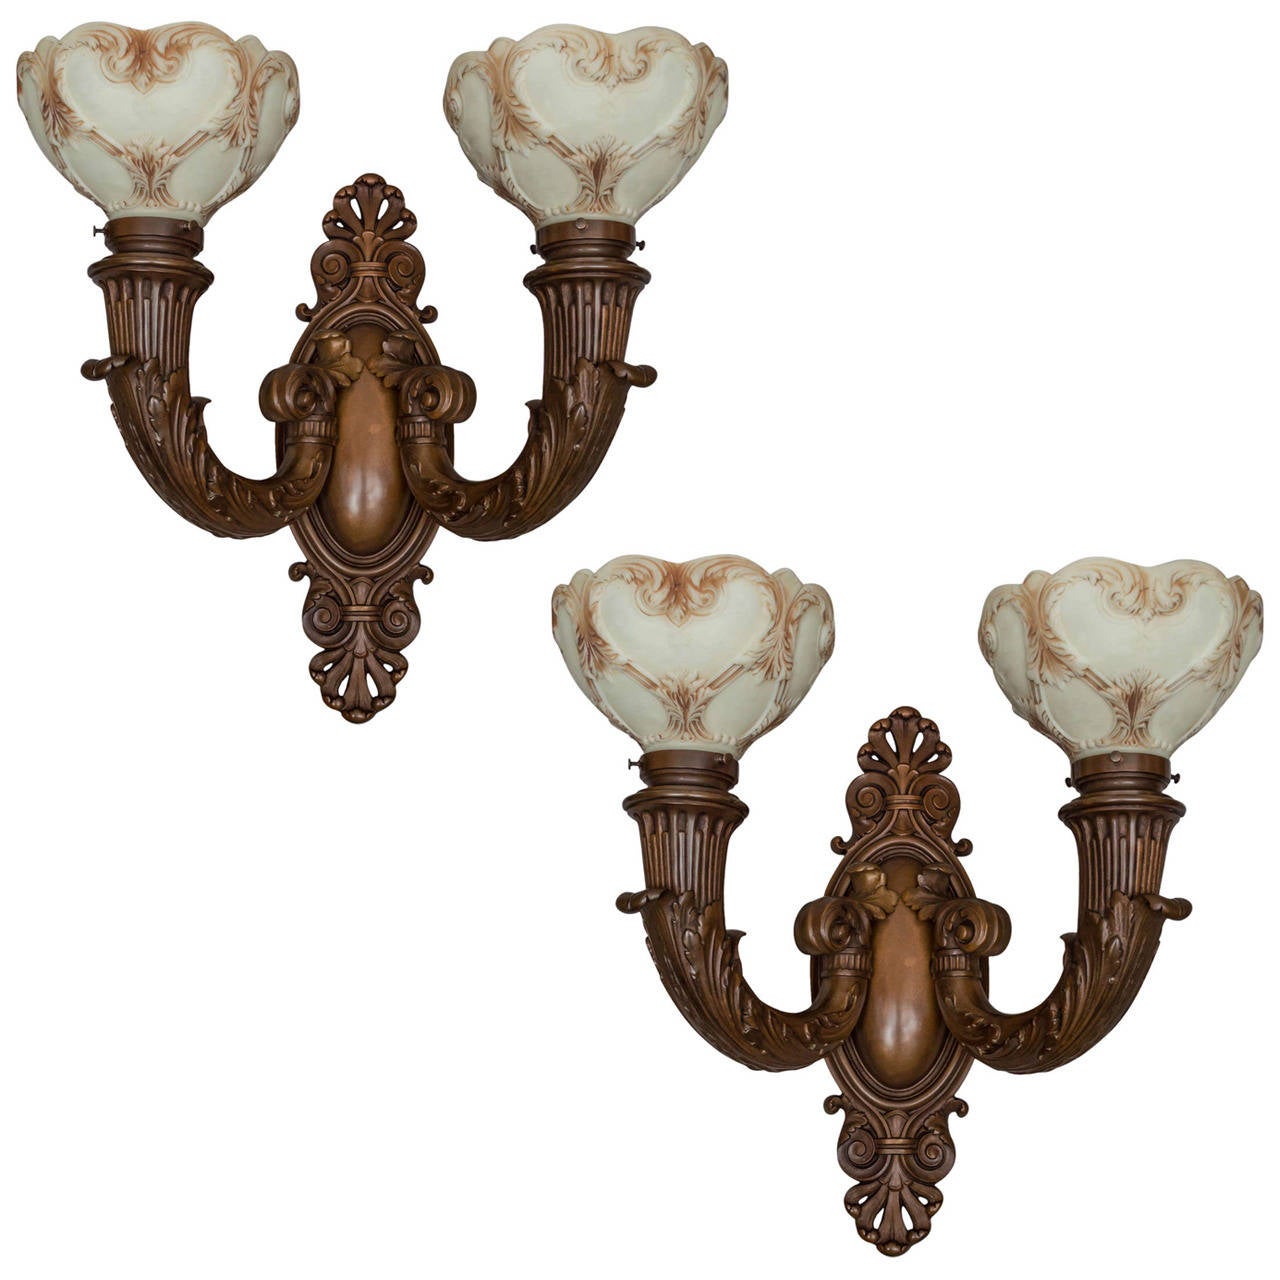 Pair of Bronze Two-Arm Sconces, Signed "Sterling Bronze"